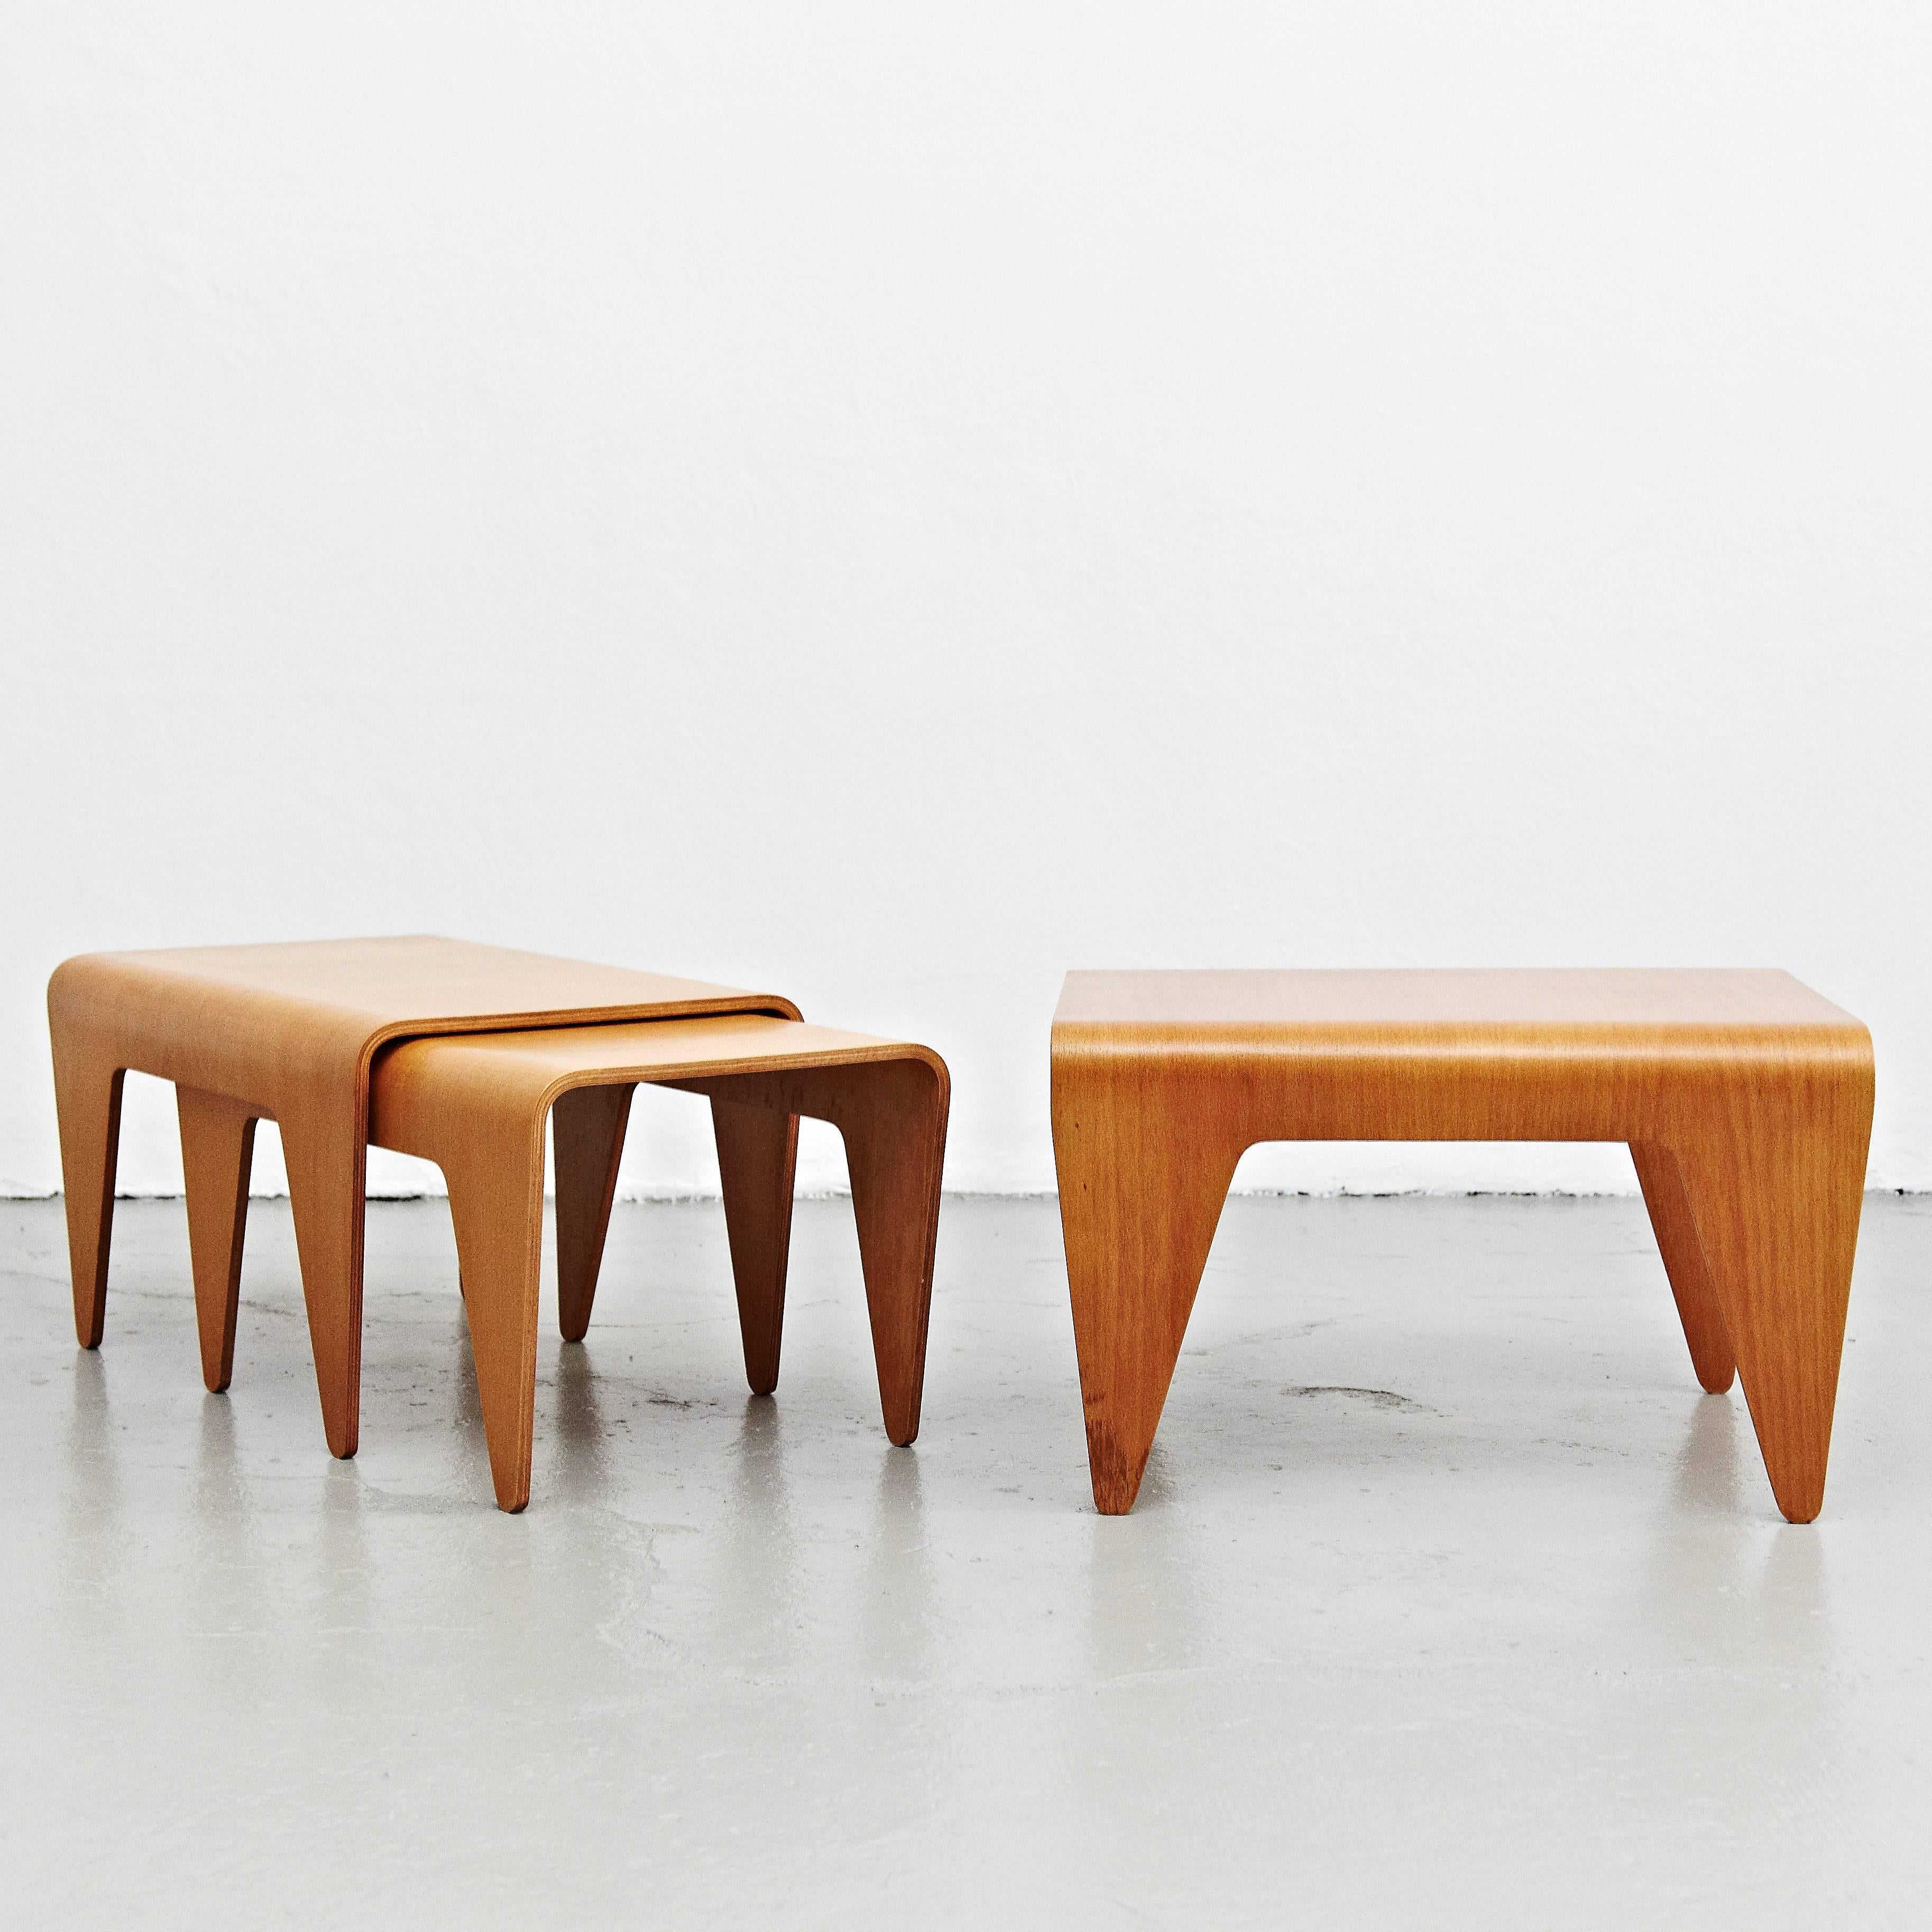 Set of three tables designed by Marcel Breuer, circa 1936 in Hungary.
Manufactured by Isokon (United Kingdom).
Beech plywood.

This set of three nesting tables are designed by the Hungarian Bauhaus designer Marcel Breuer. They each are a one beech